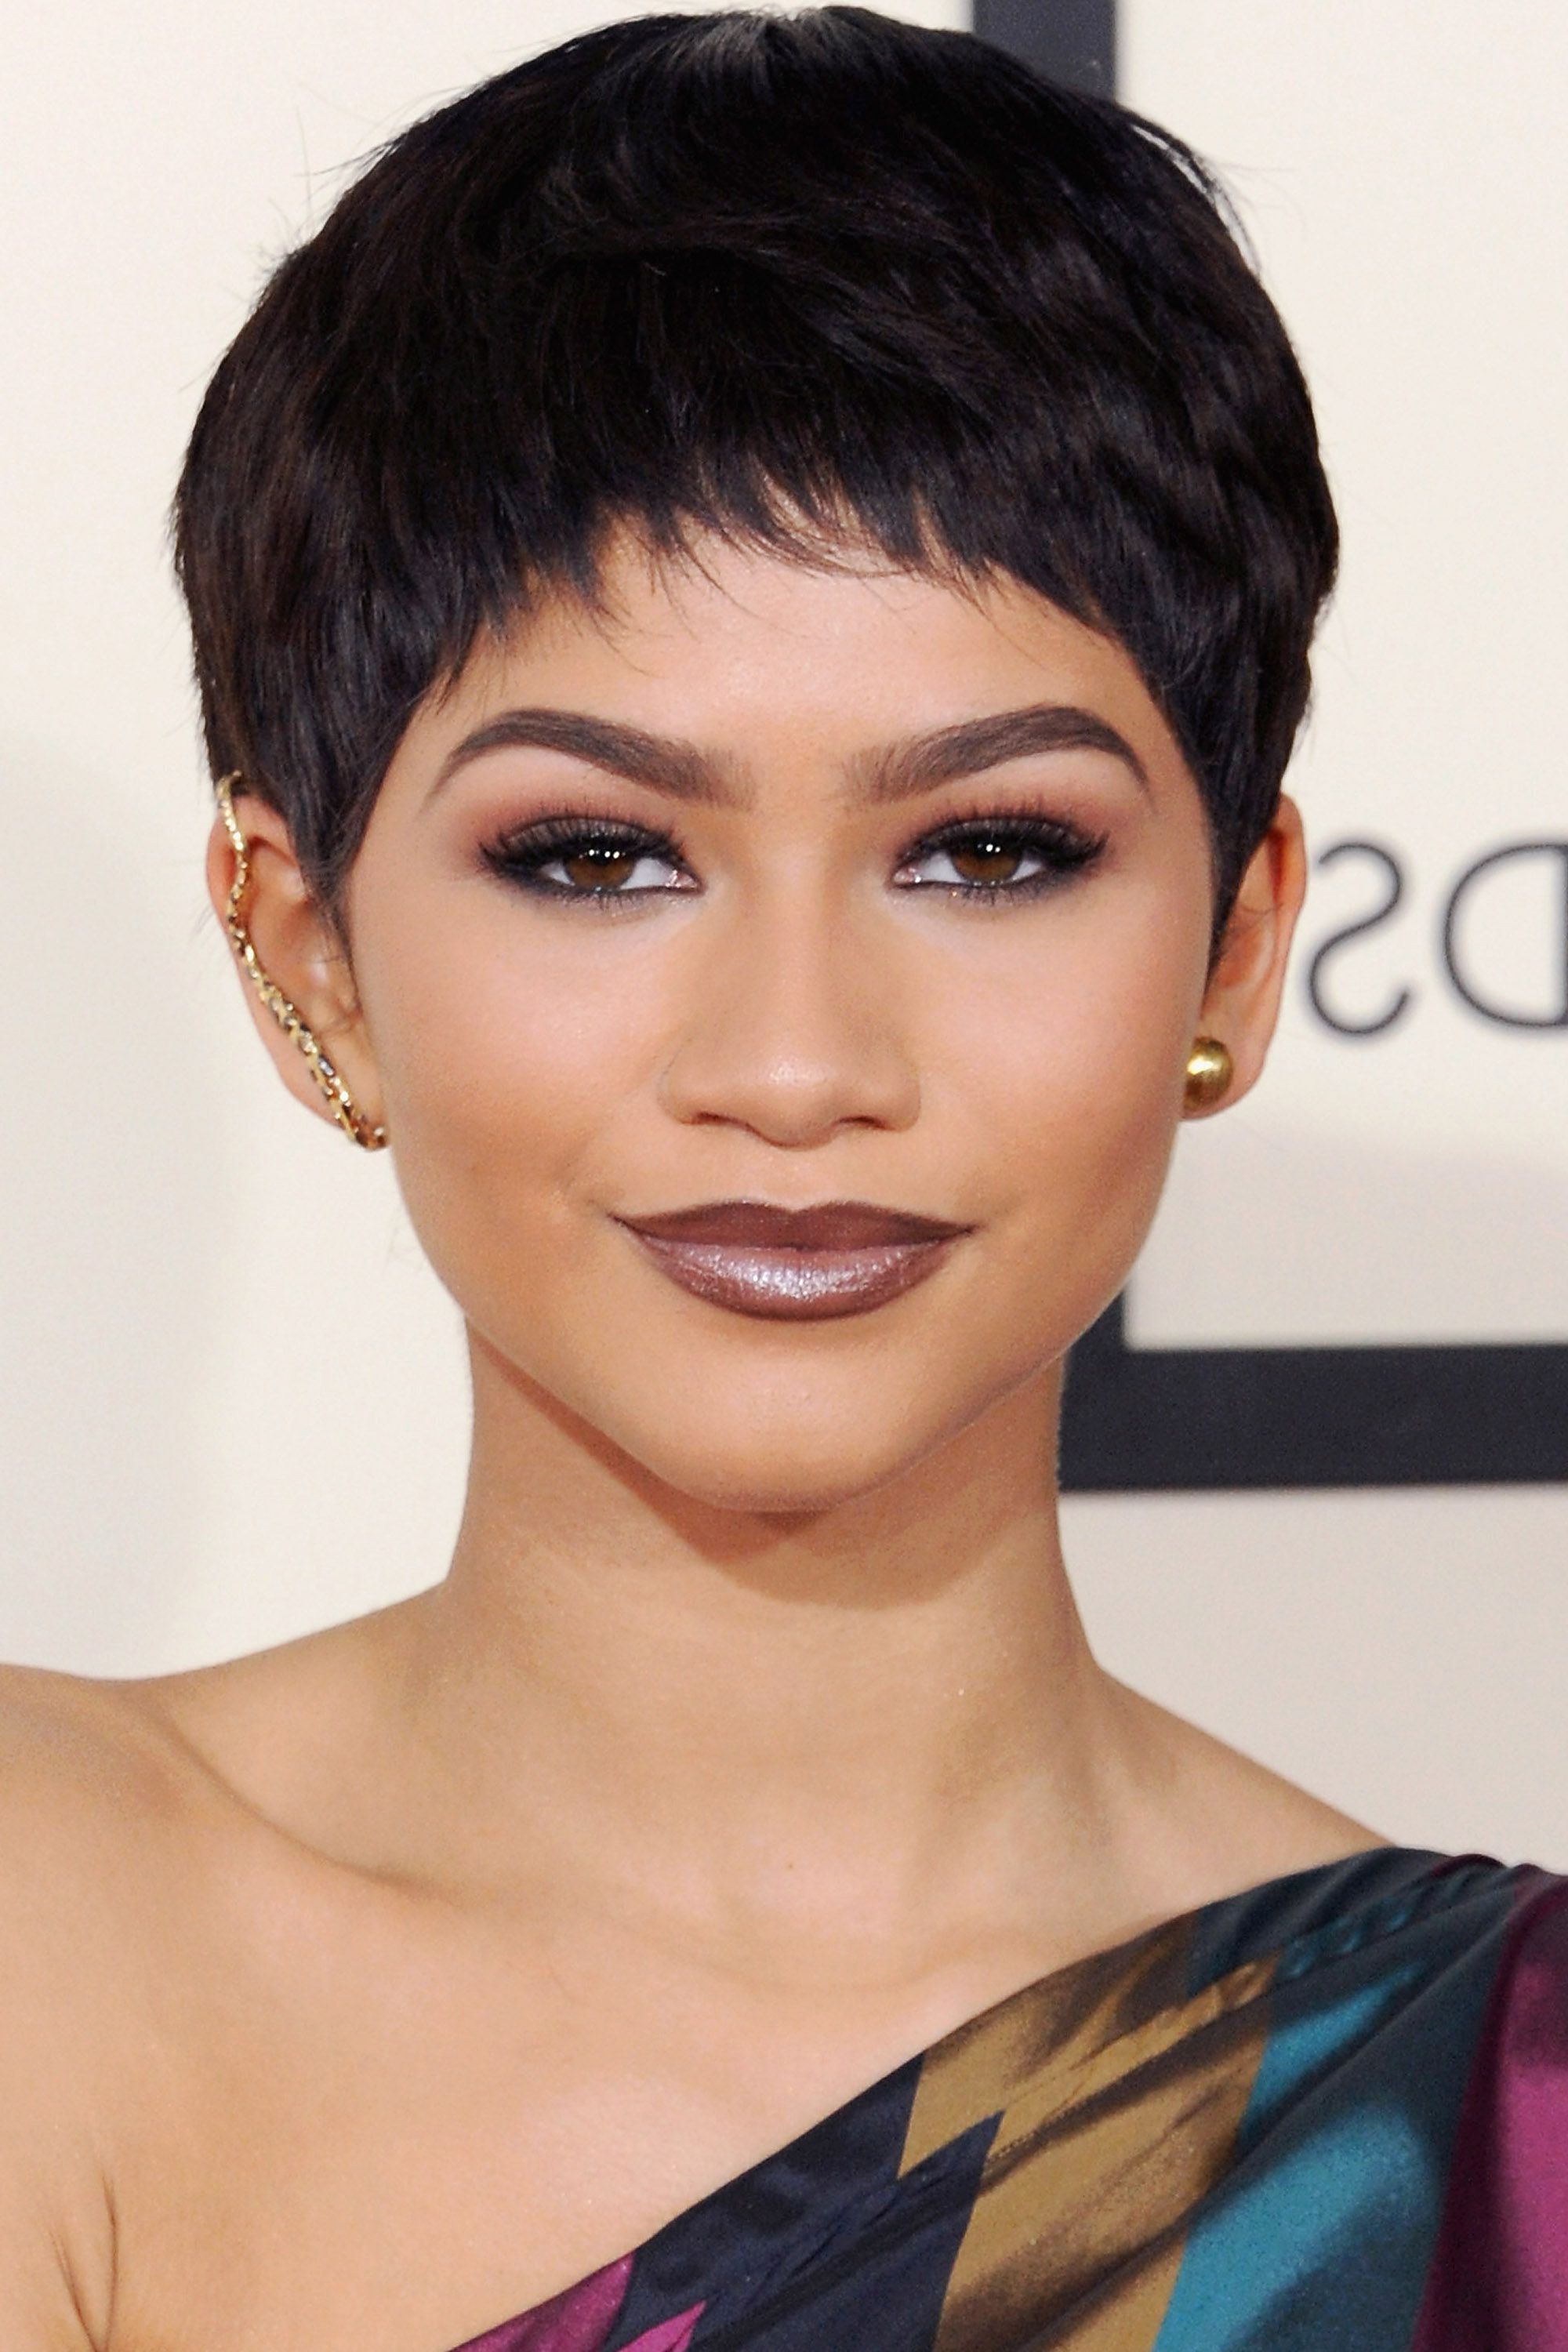 50+ Pixie Cuts We Love For 2018 – Short Pixie Hairstyles From With Short Haircuts With Fringe Bangs (View 24 of 25)